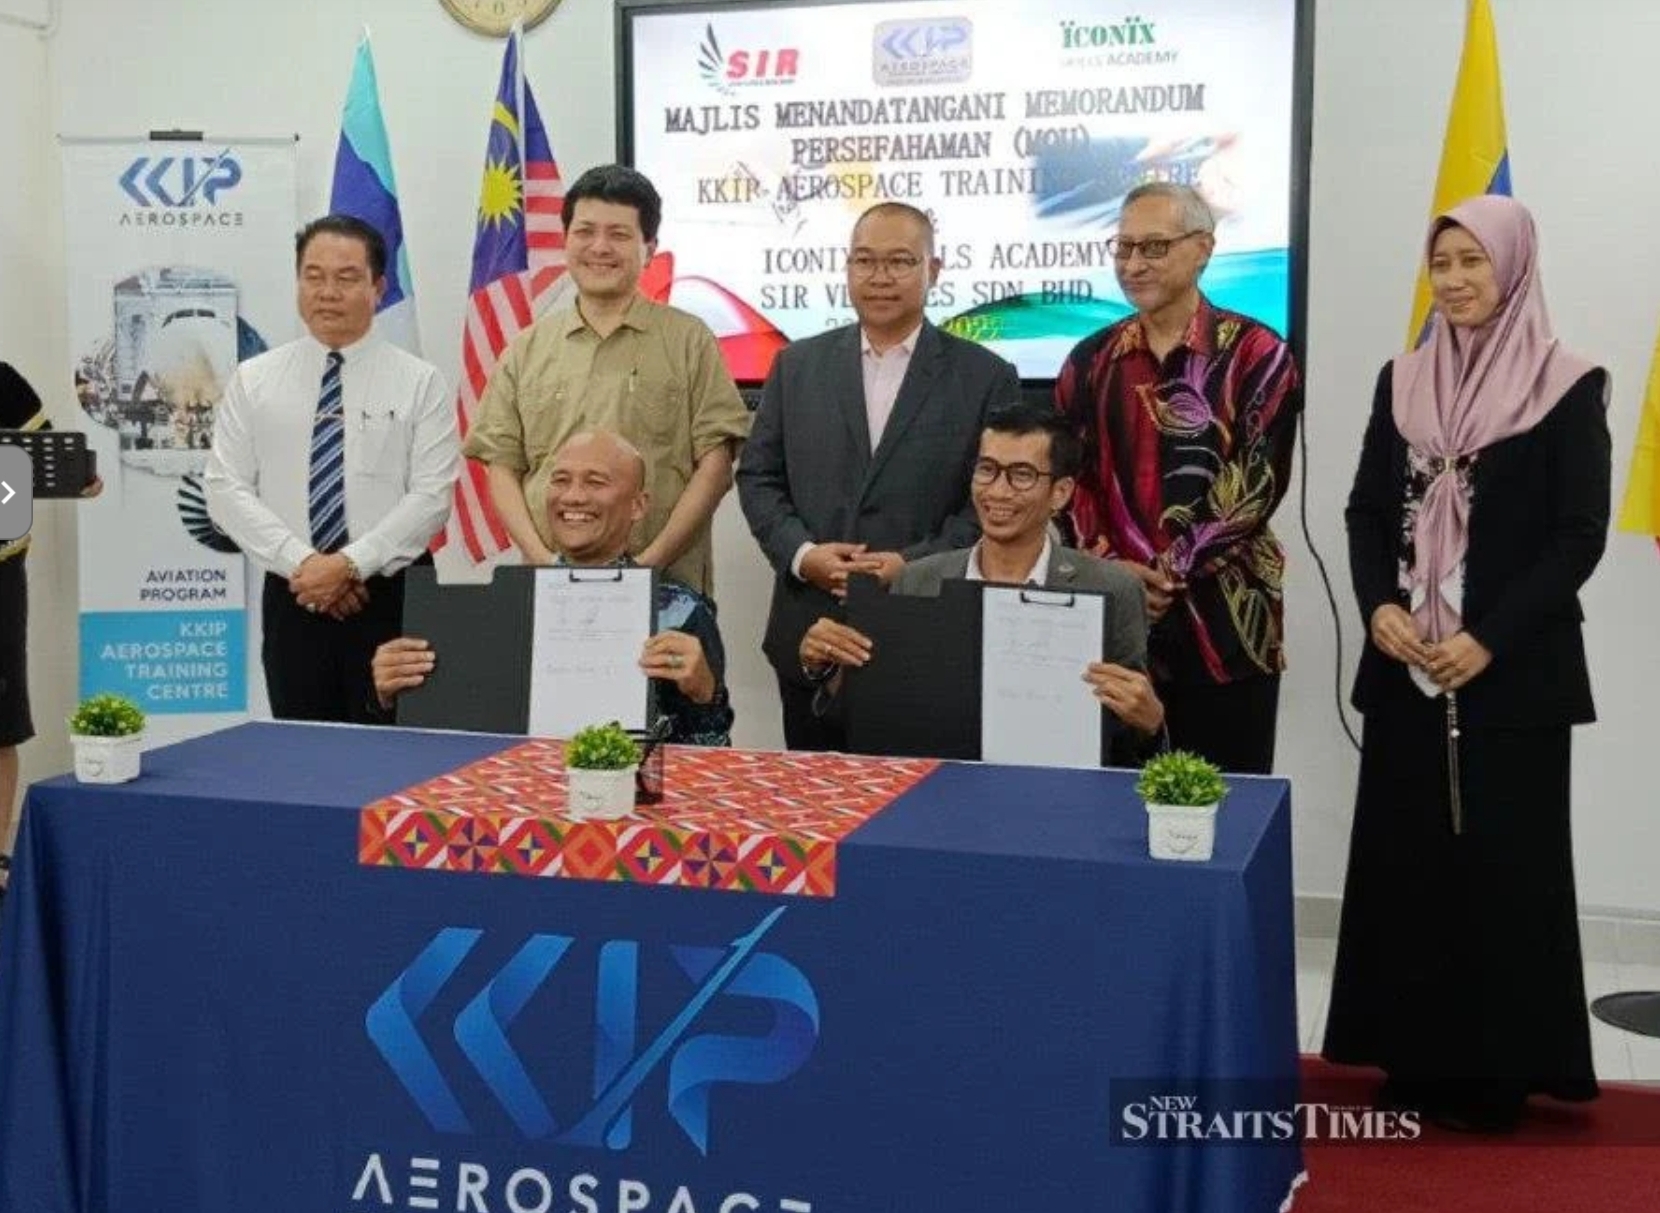 KKIP Aerospace Training Centre (KATC) chief executive officer Aminuddin Zakaria (left) and Sir Ventures Sdn Bhd chief executive officer Che Wan Imanuddin Takwa signing Memorandum of Understanding to offer training plus employment (TREM) in highly paid aircraft painting profession. - NSTP/OLIVIA MIWIL